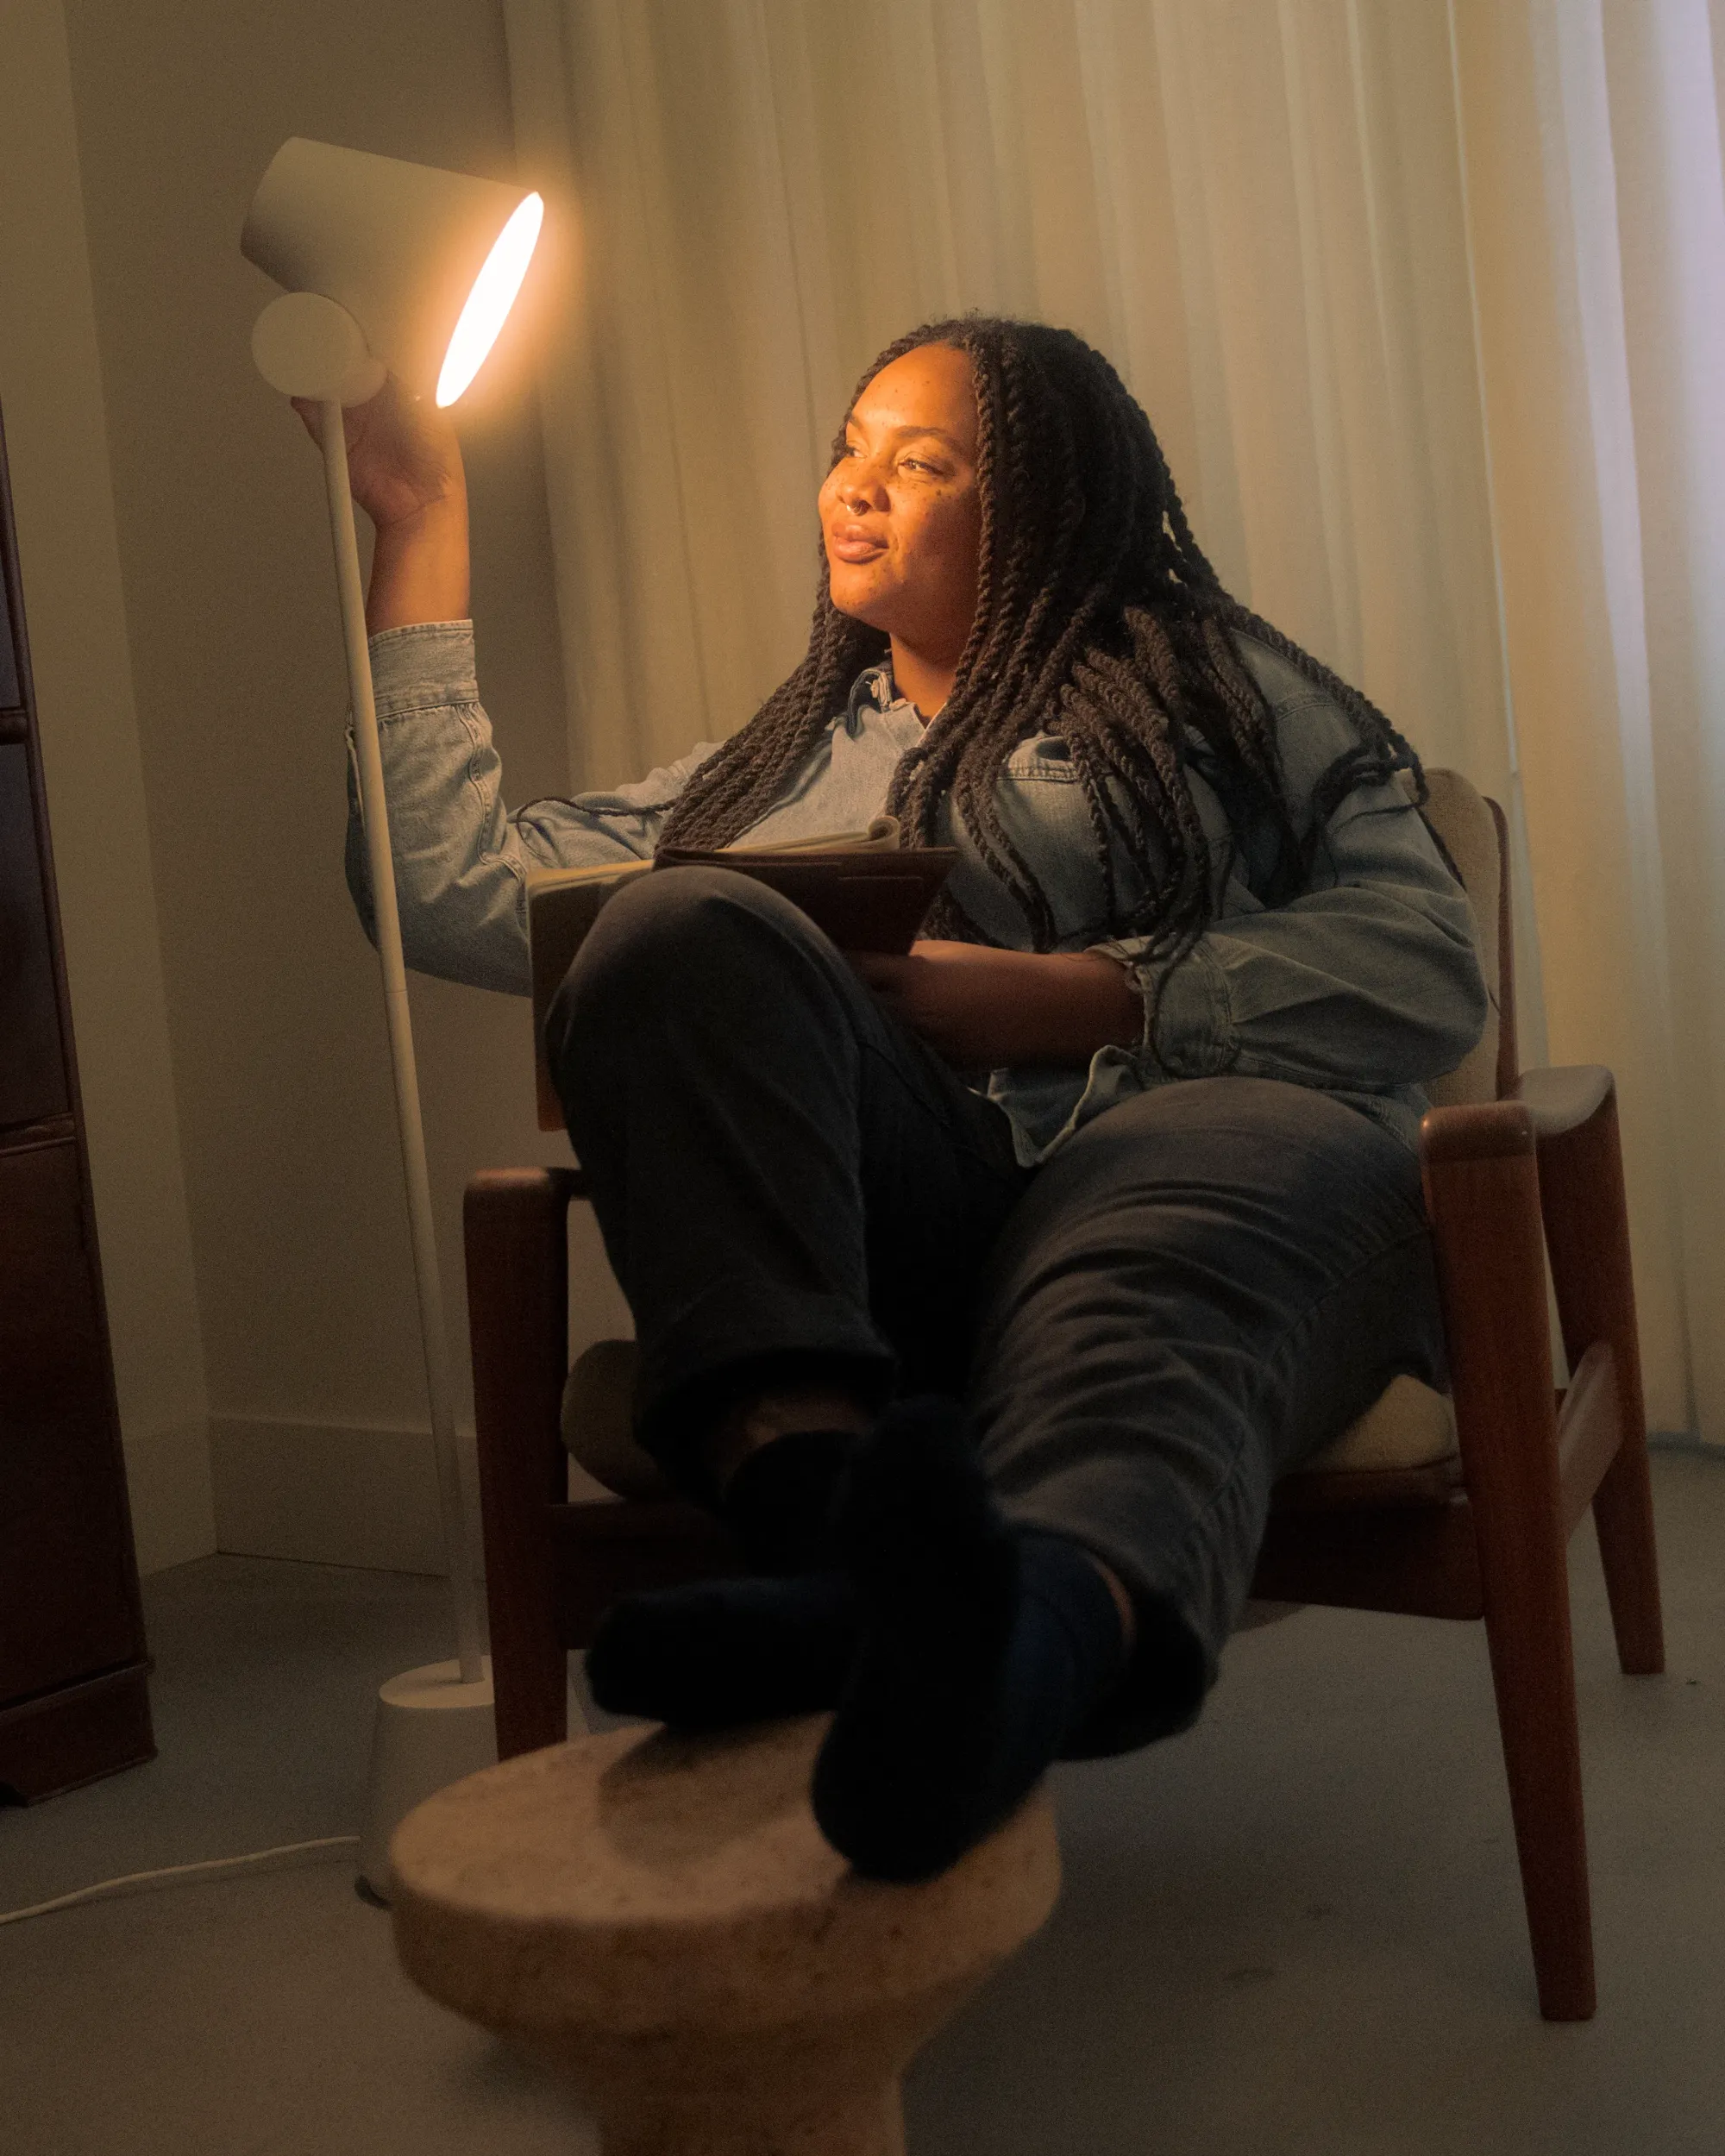 A woman sits on her living room chair. She is holding a tablet and a thin magazine in one hand,  and touching Gantri’s Aim Floor Light with the other. The light illuminates her face and frame